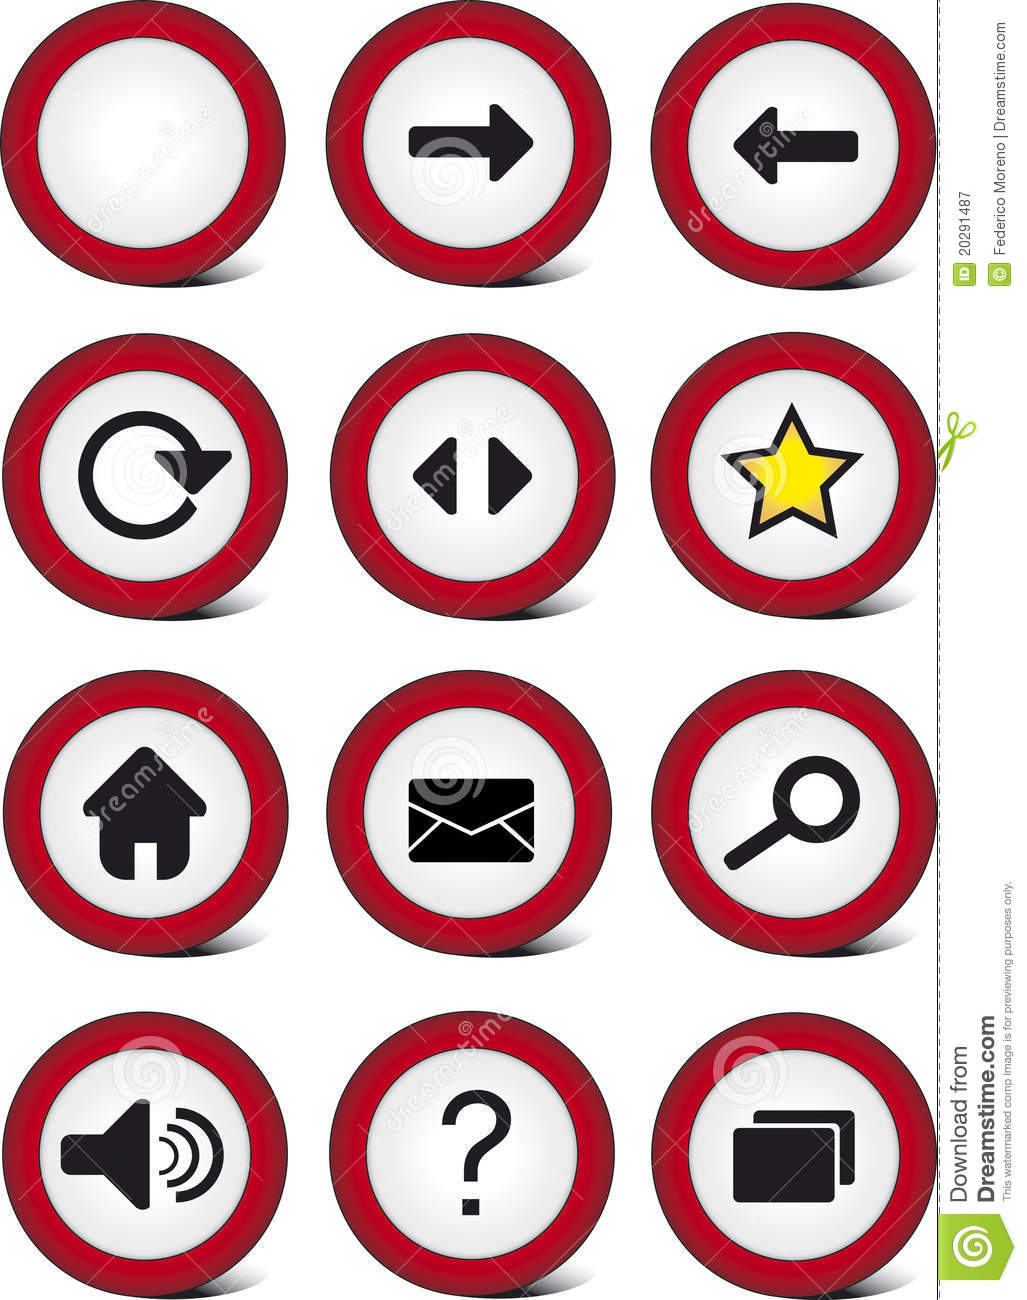 Web Navigation Buttons and Icons